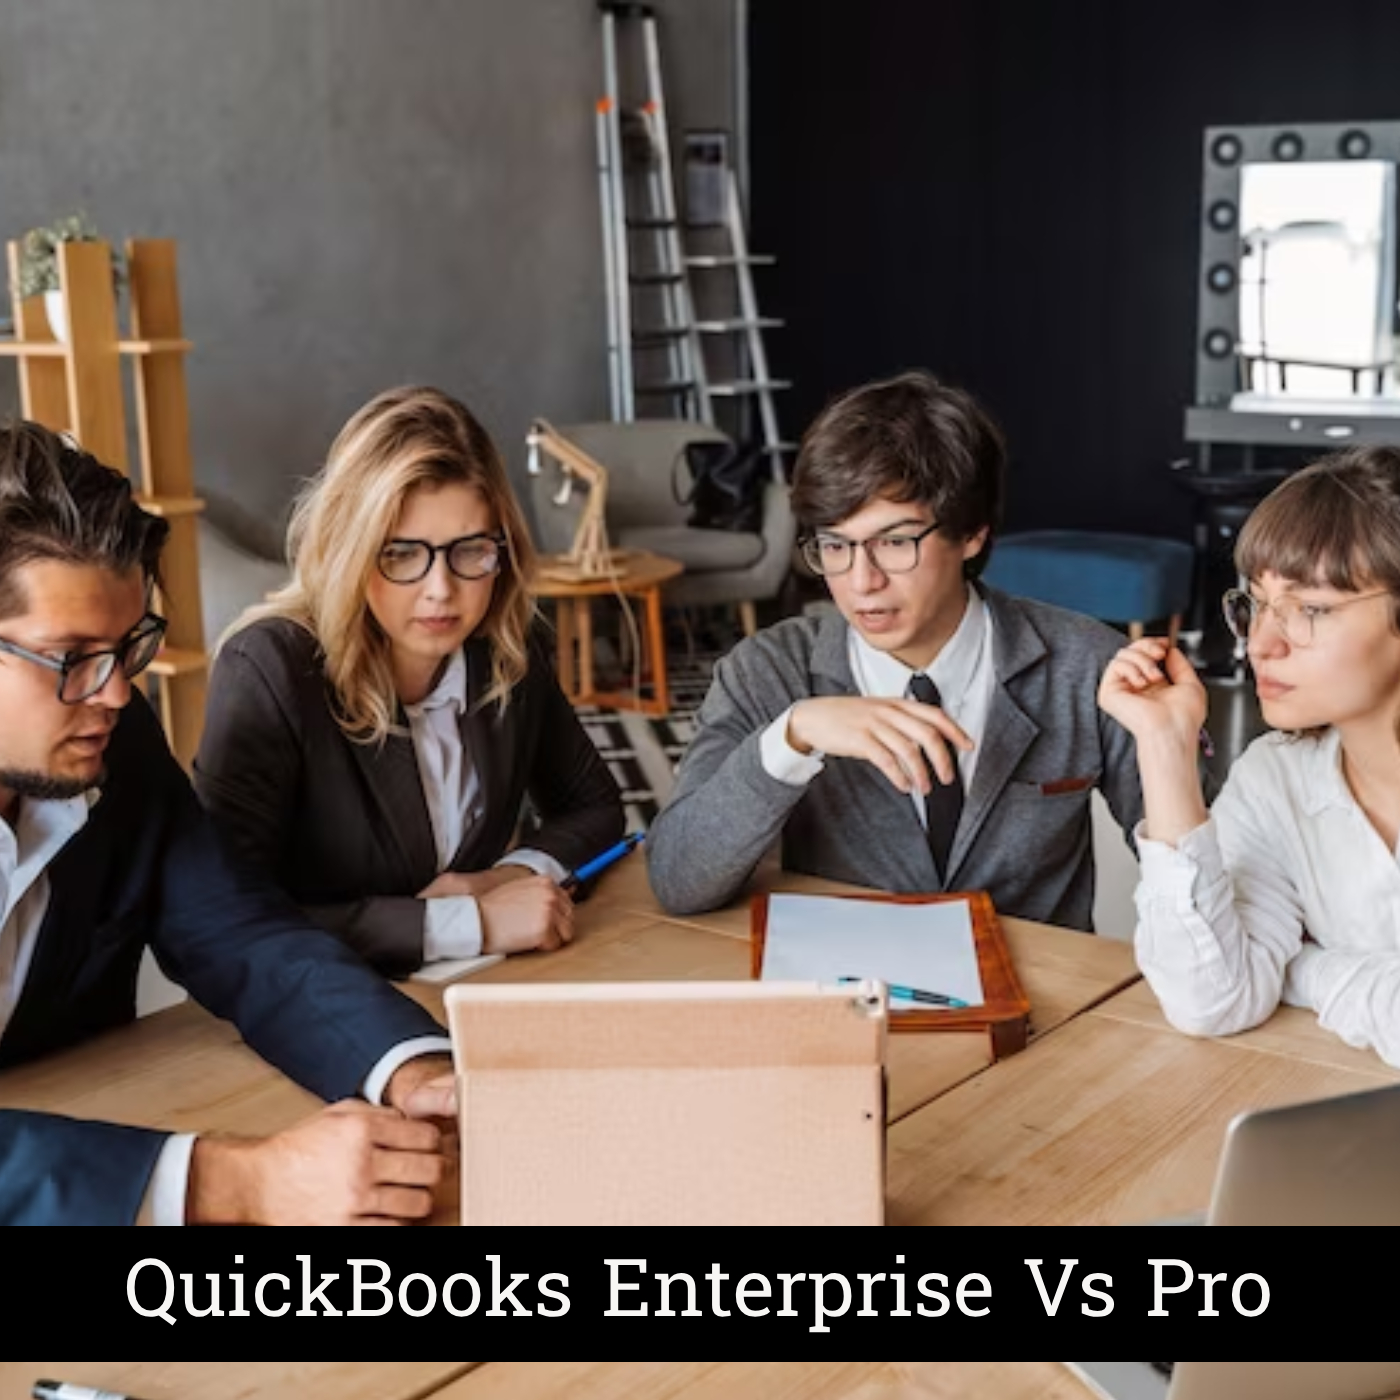 QuickBooks Enterprise Vs Pro: Which One Is Right for Your Business?